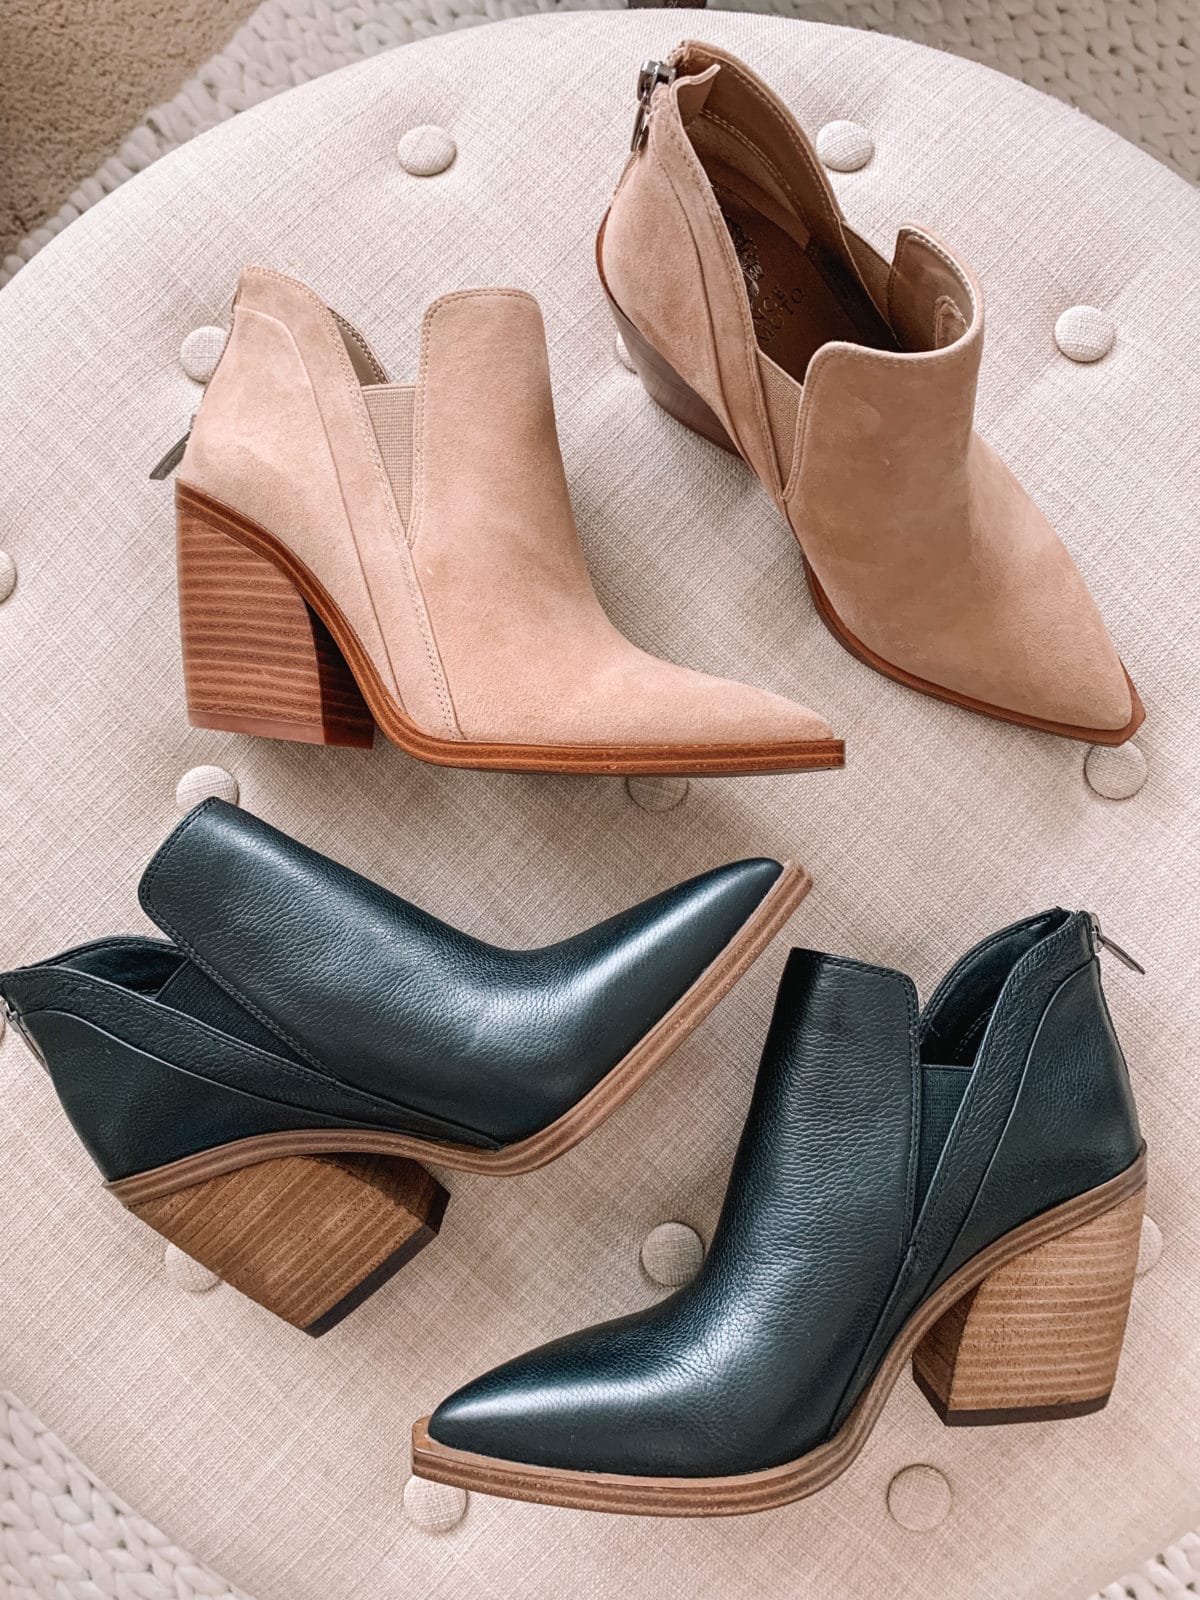 Nordstrom Sale Fashion Finds, Booties